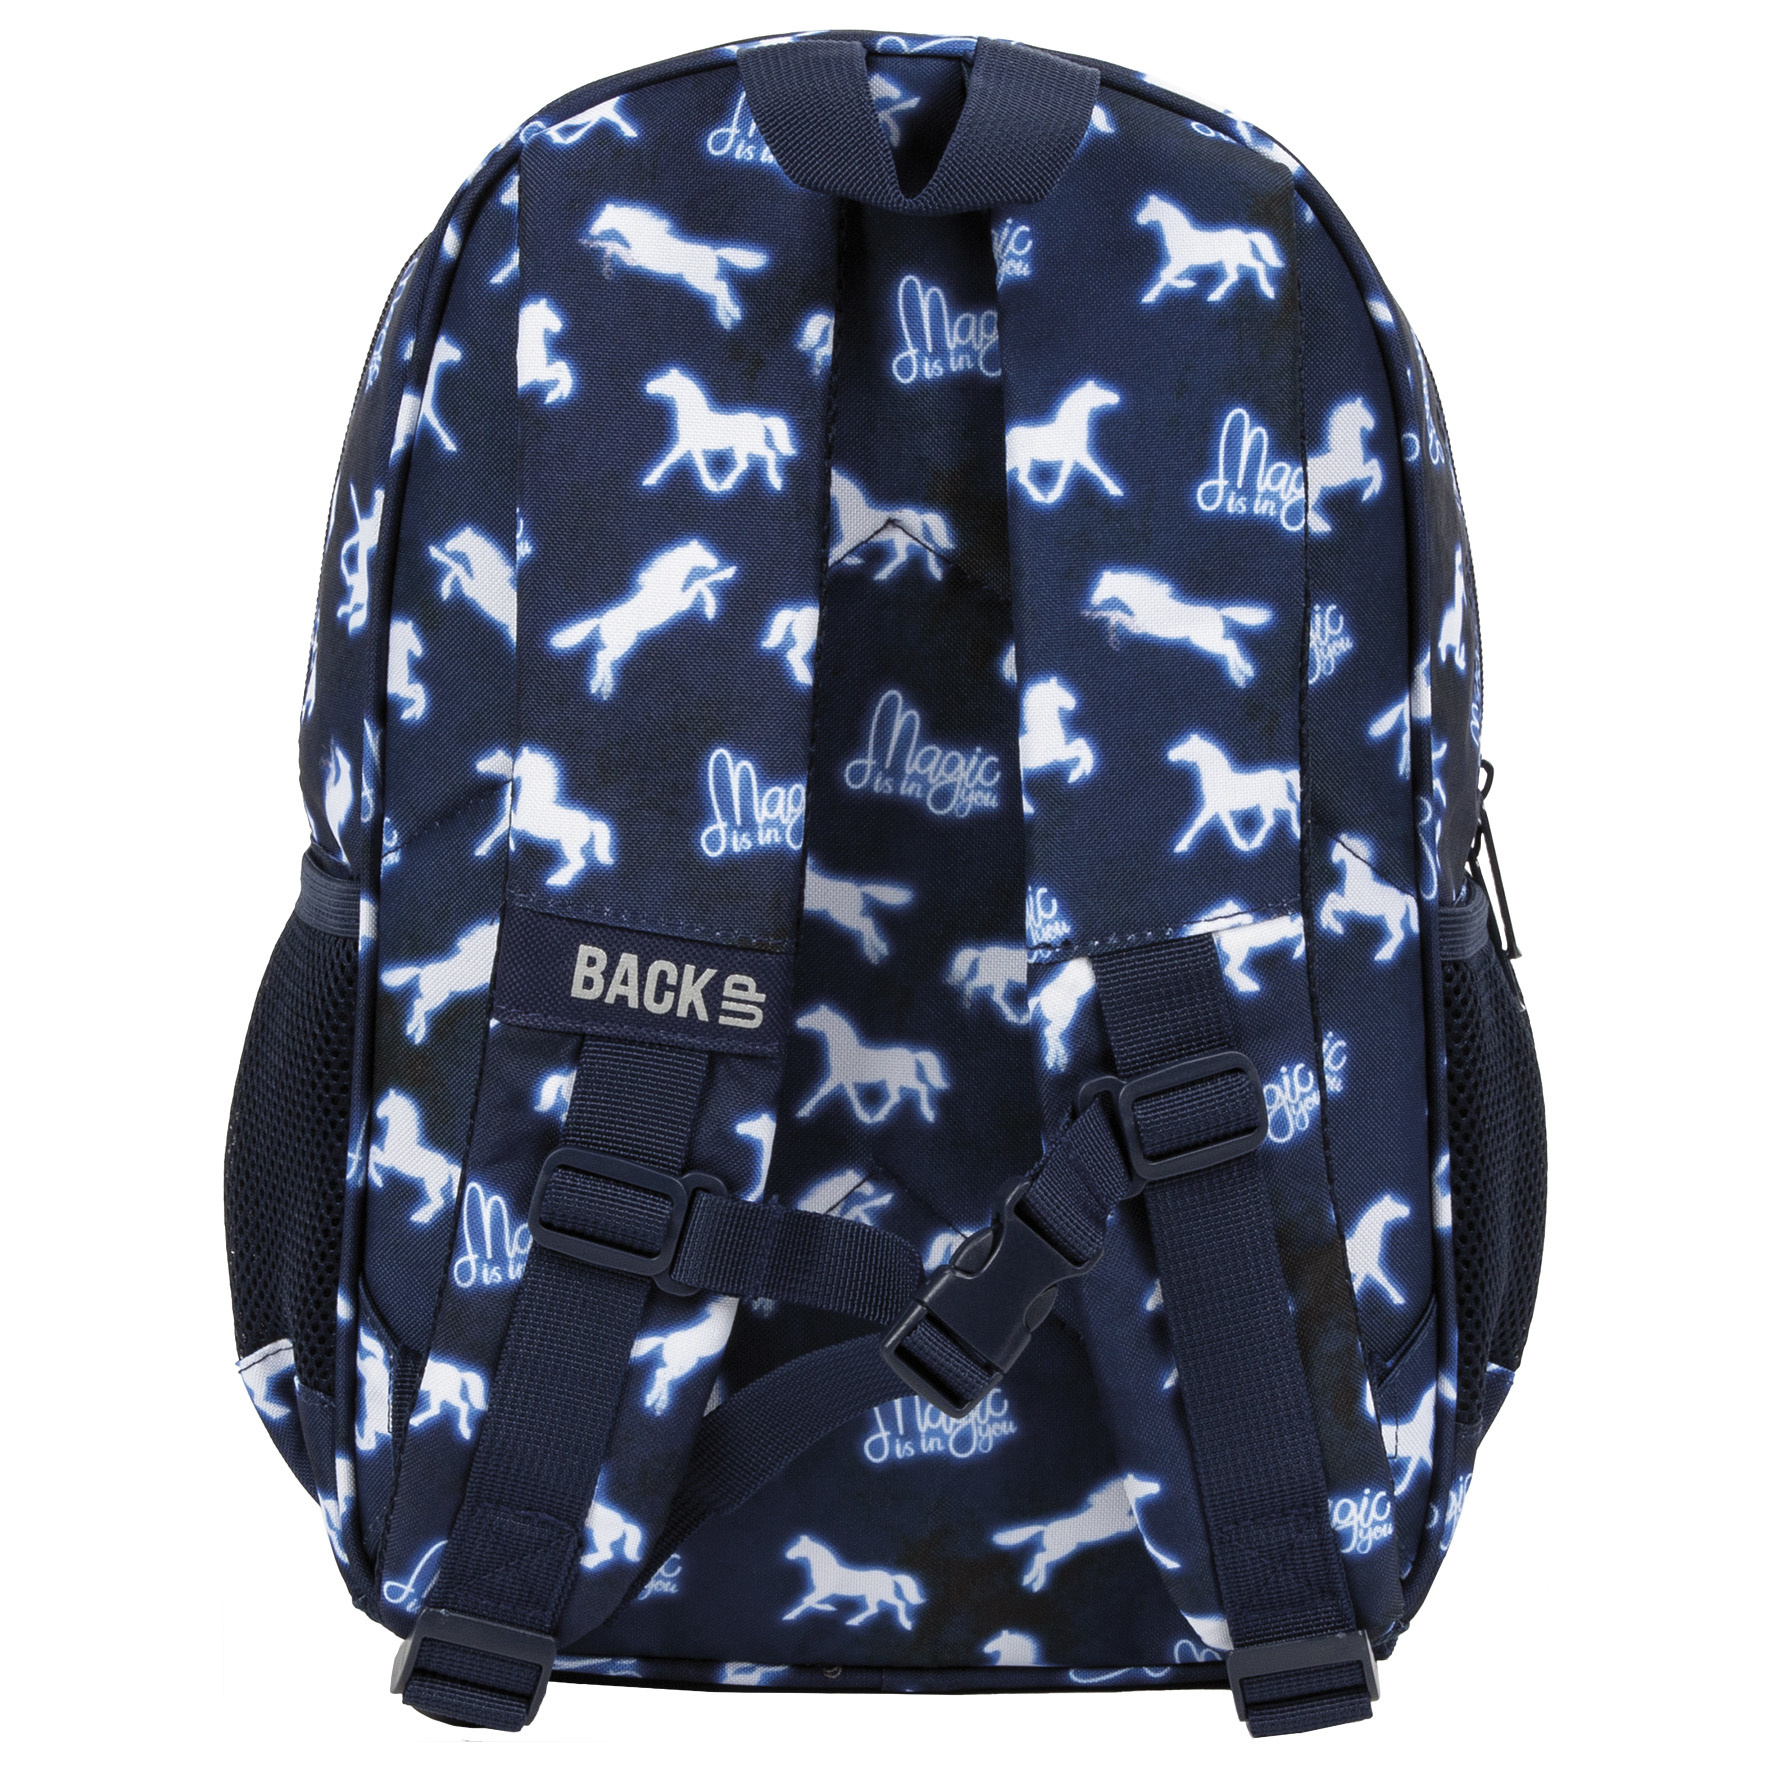 BackUP backpack Horse - 34 x 26 x 14 cm - Polyester